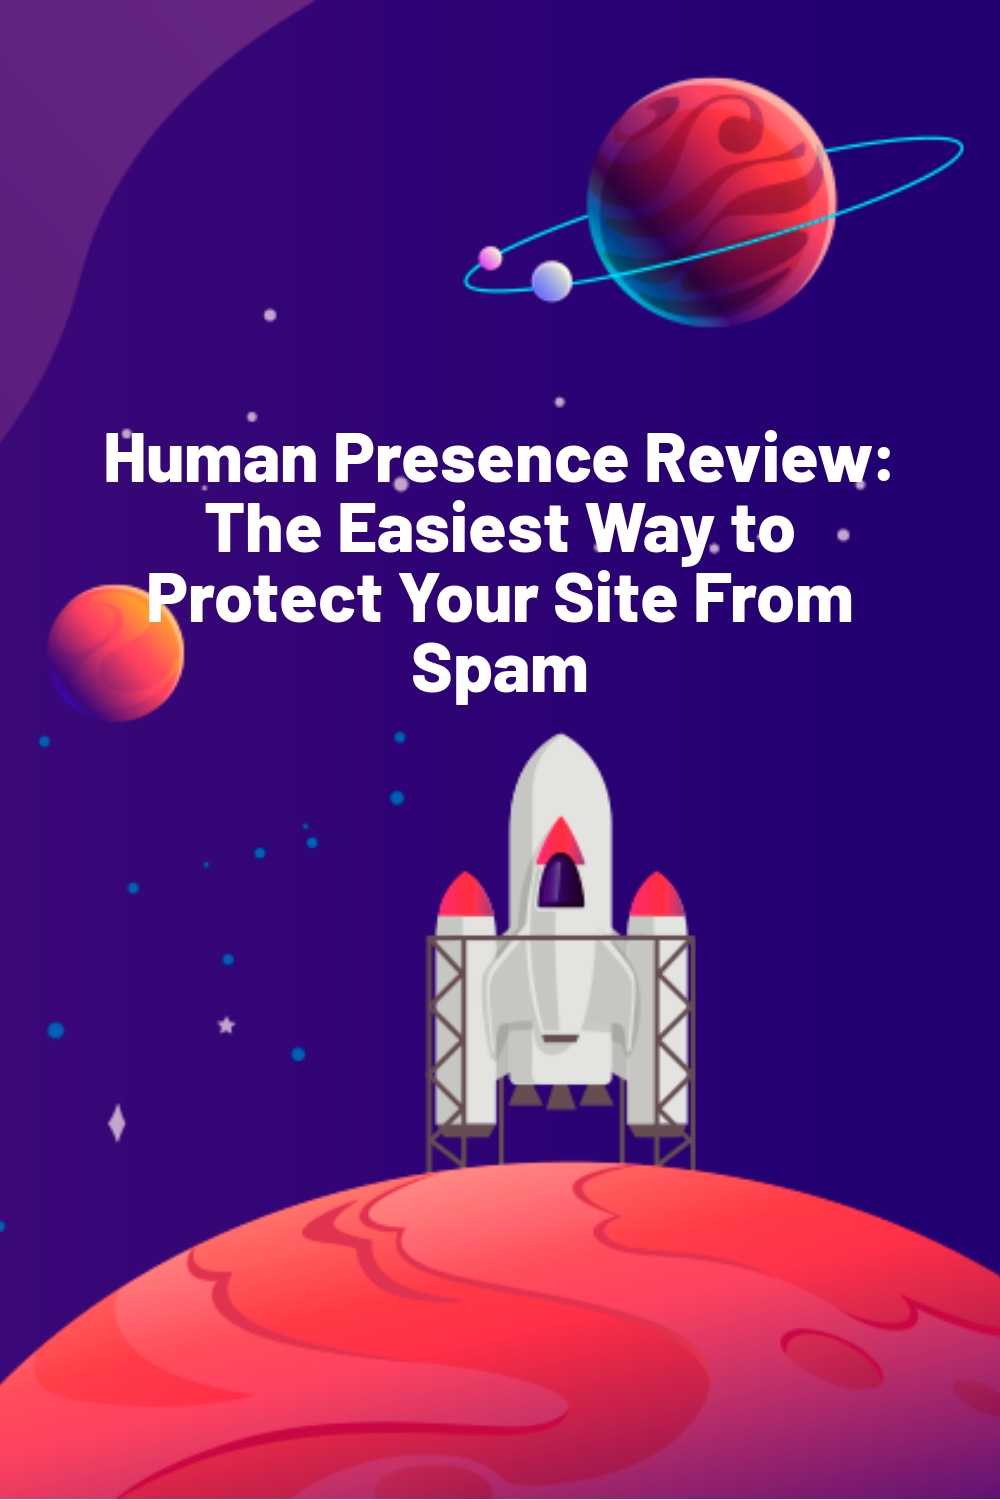 Human Presence Review: The Easiest Way to Protect Your Site From Spam